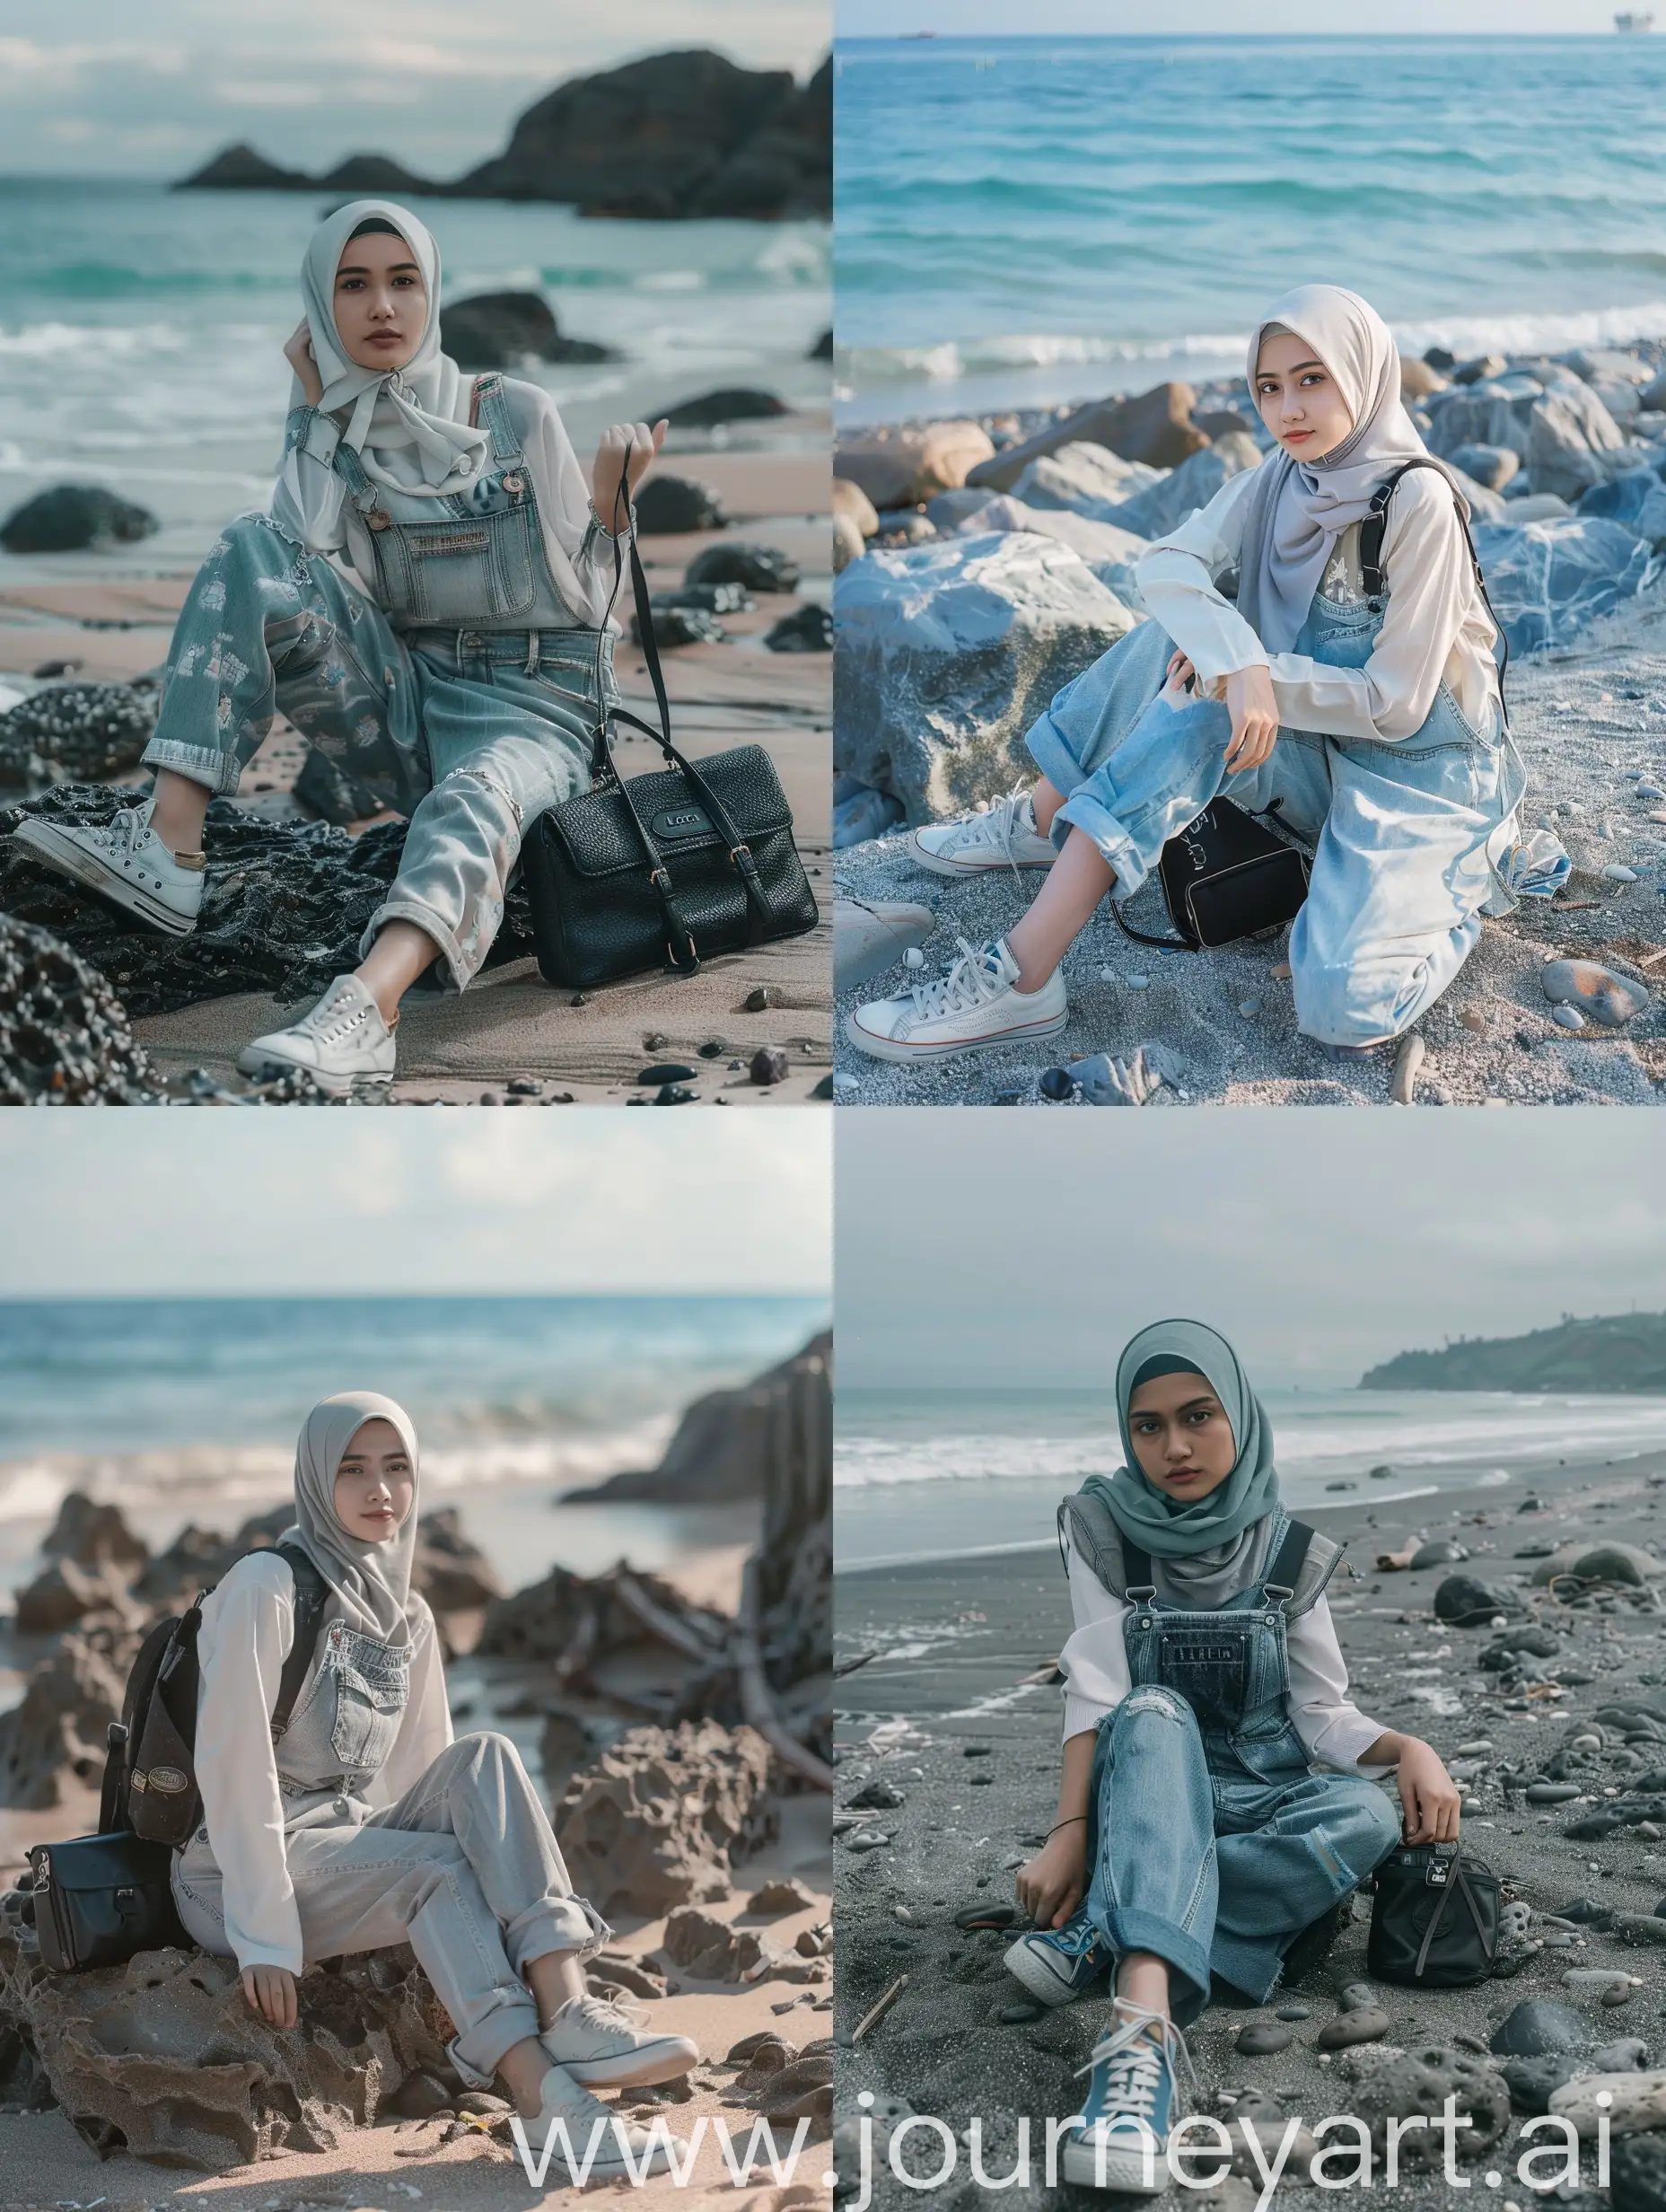 Stylish-Indonesian-Hijab-Fashion-Beachside-Portrait-in-Overalls-and-Sneakers